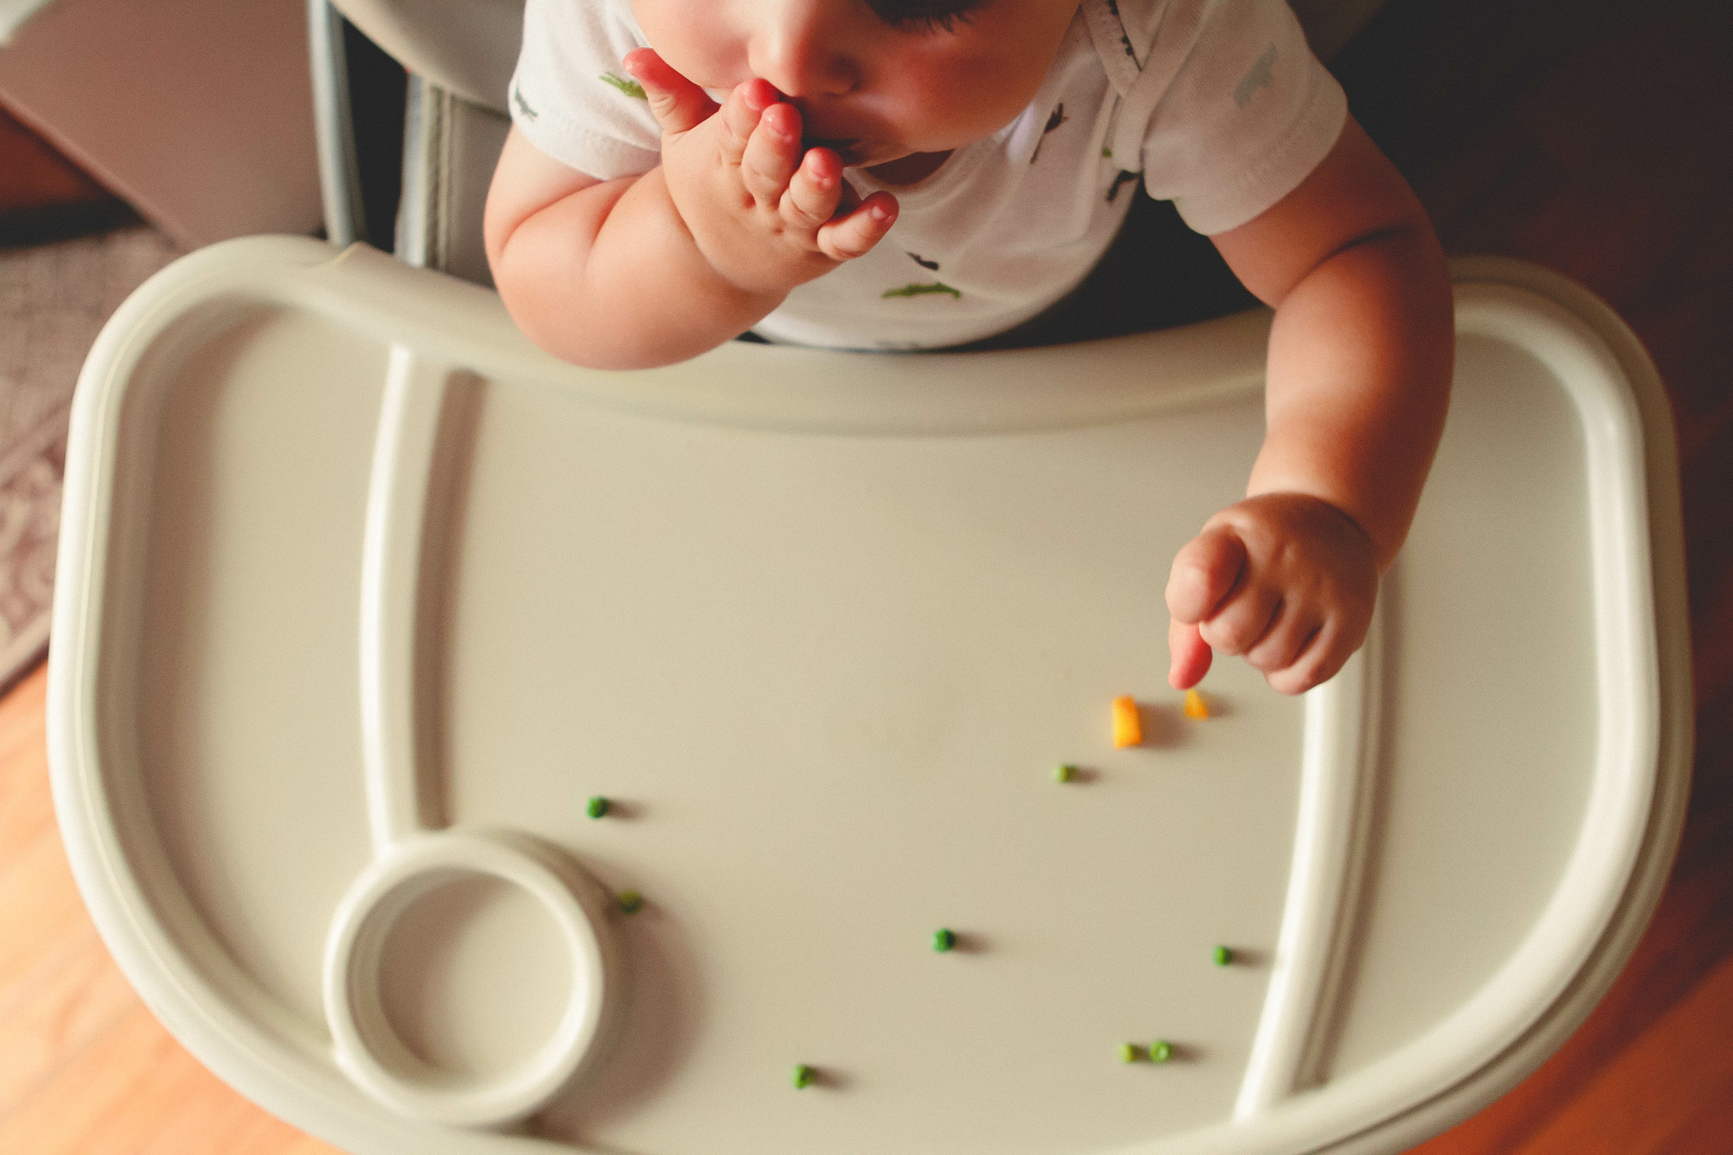 Baby eating solids